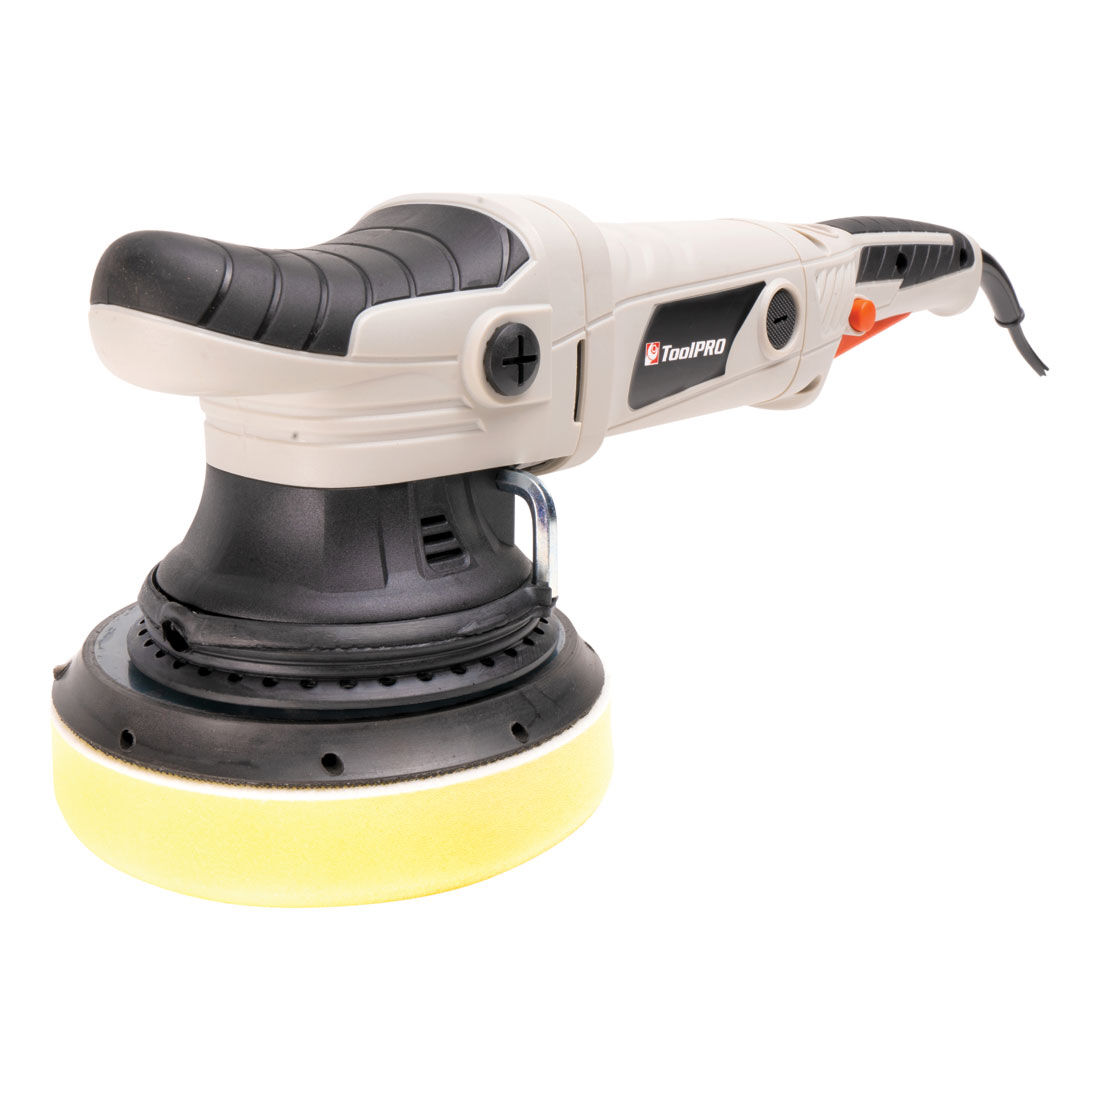 ToolPRO 150mm Dual Action Polisher 720W, , scaau_hi-res